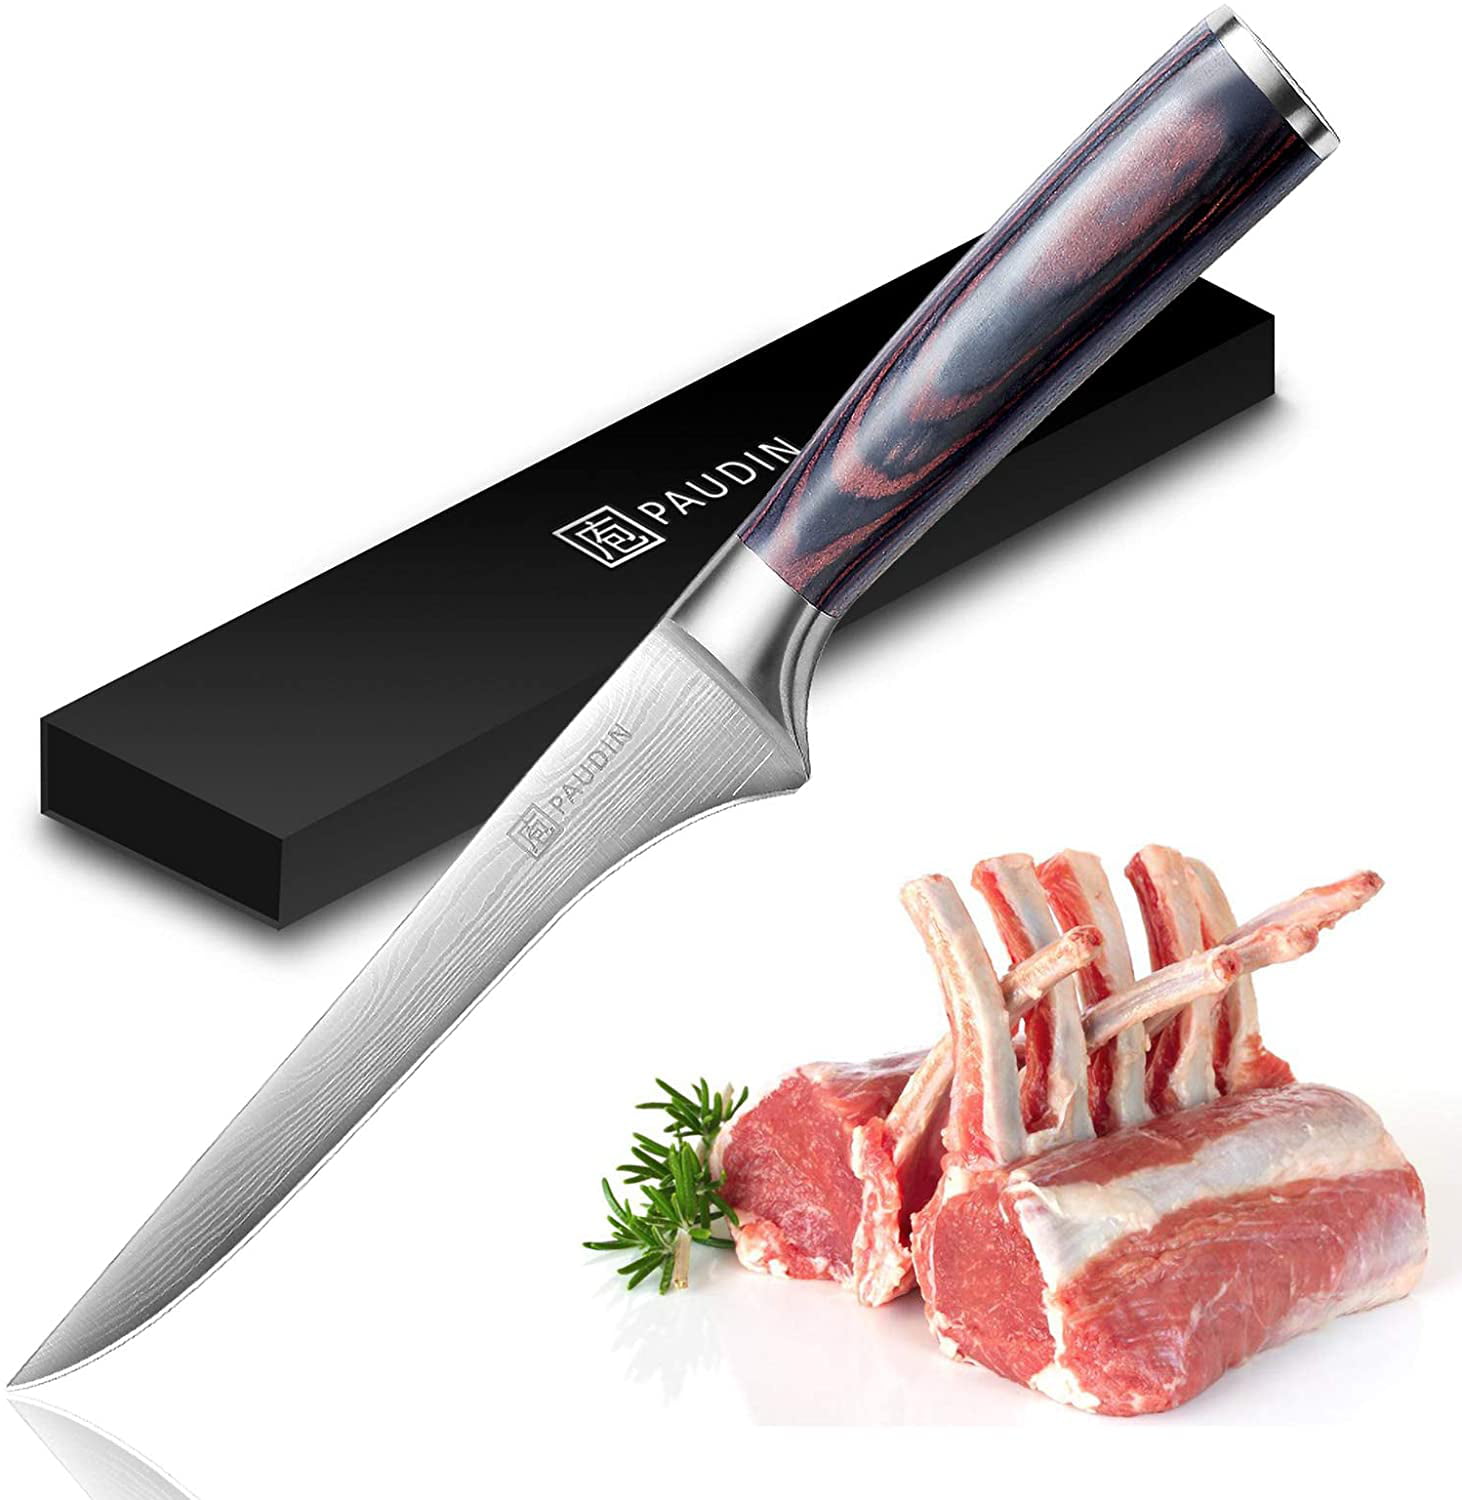 Fillet Knife Paudin Super Sharp Boning Knife 6 Inch German High Carbon Stainless Steel Flexible Kitchen Knife For Meat Fish Poultry Chicken With Ergonomic Handle Walmart Com Walmart Com